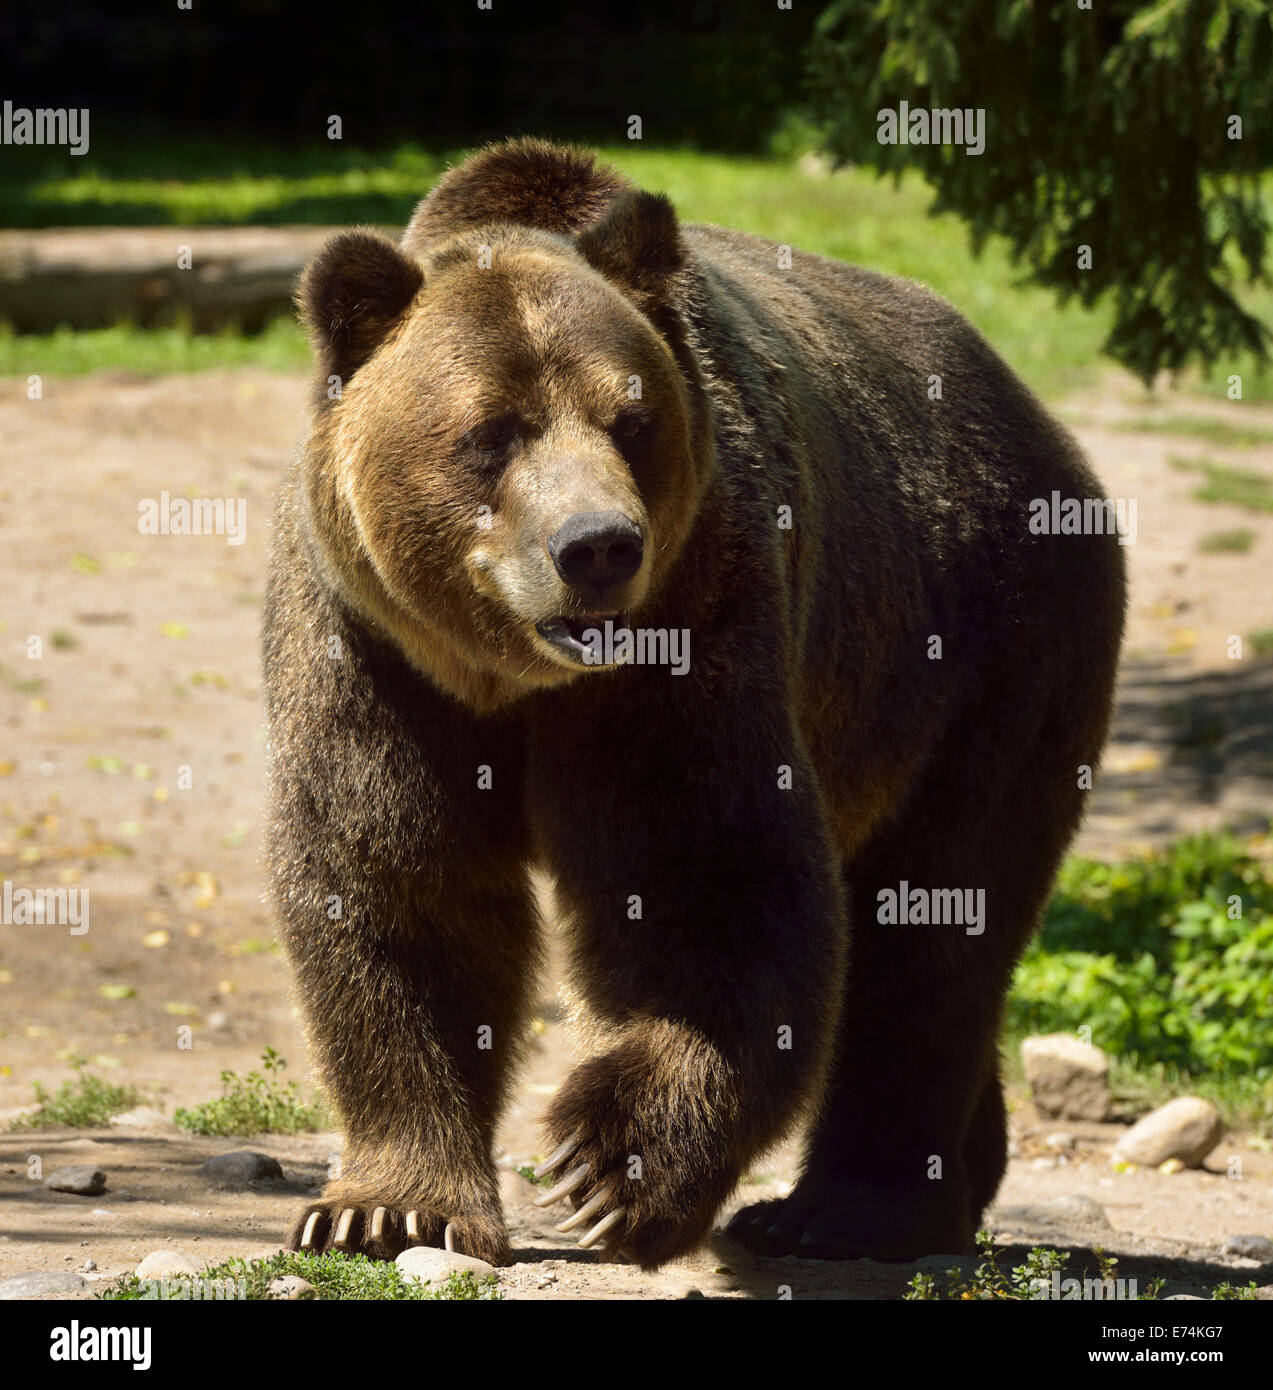 Mature Mainland Grizzly bear subspecies of brown bear walking on path at the Toronto Zoo Stock Photo